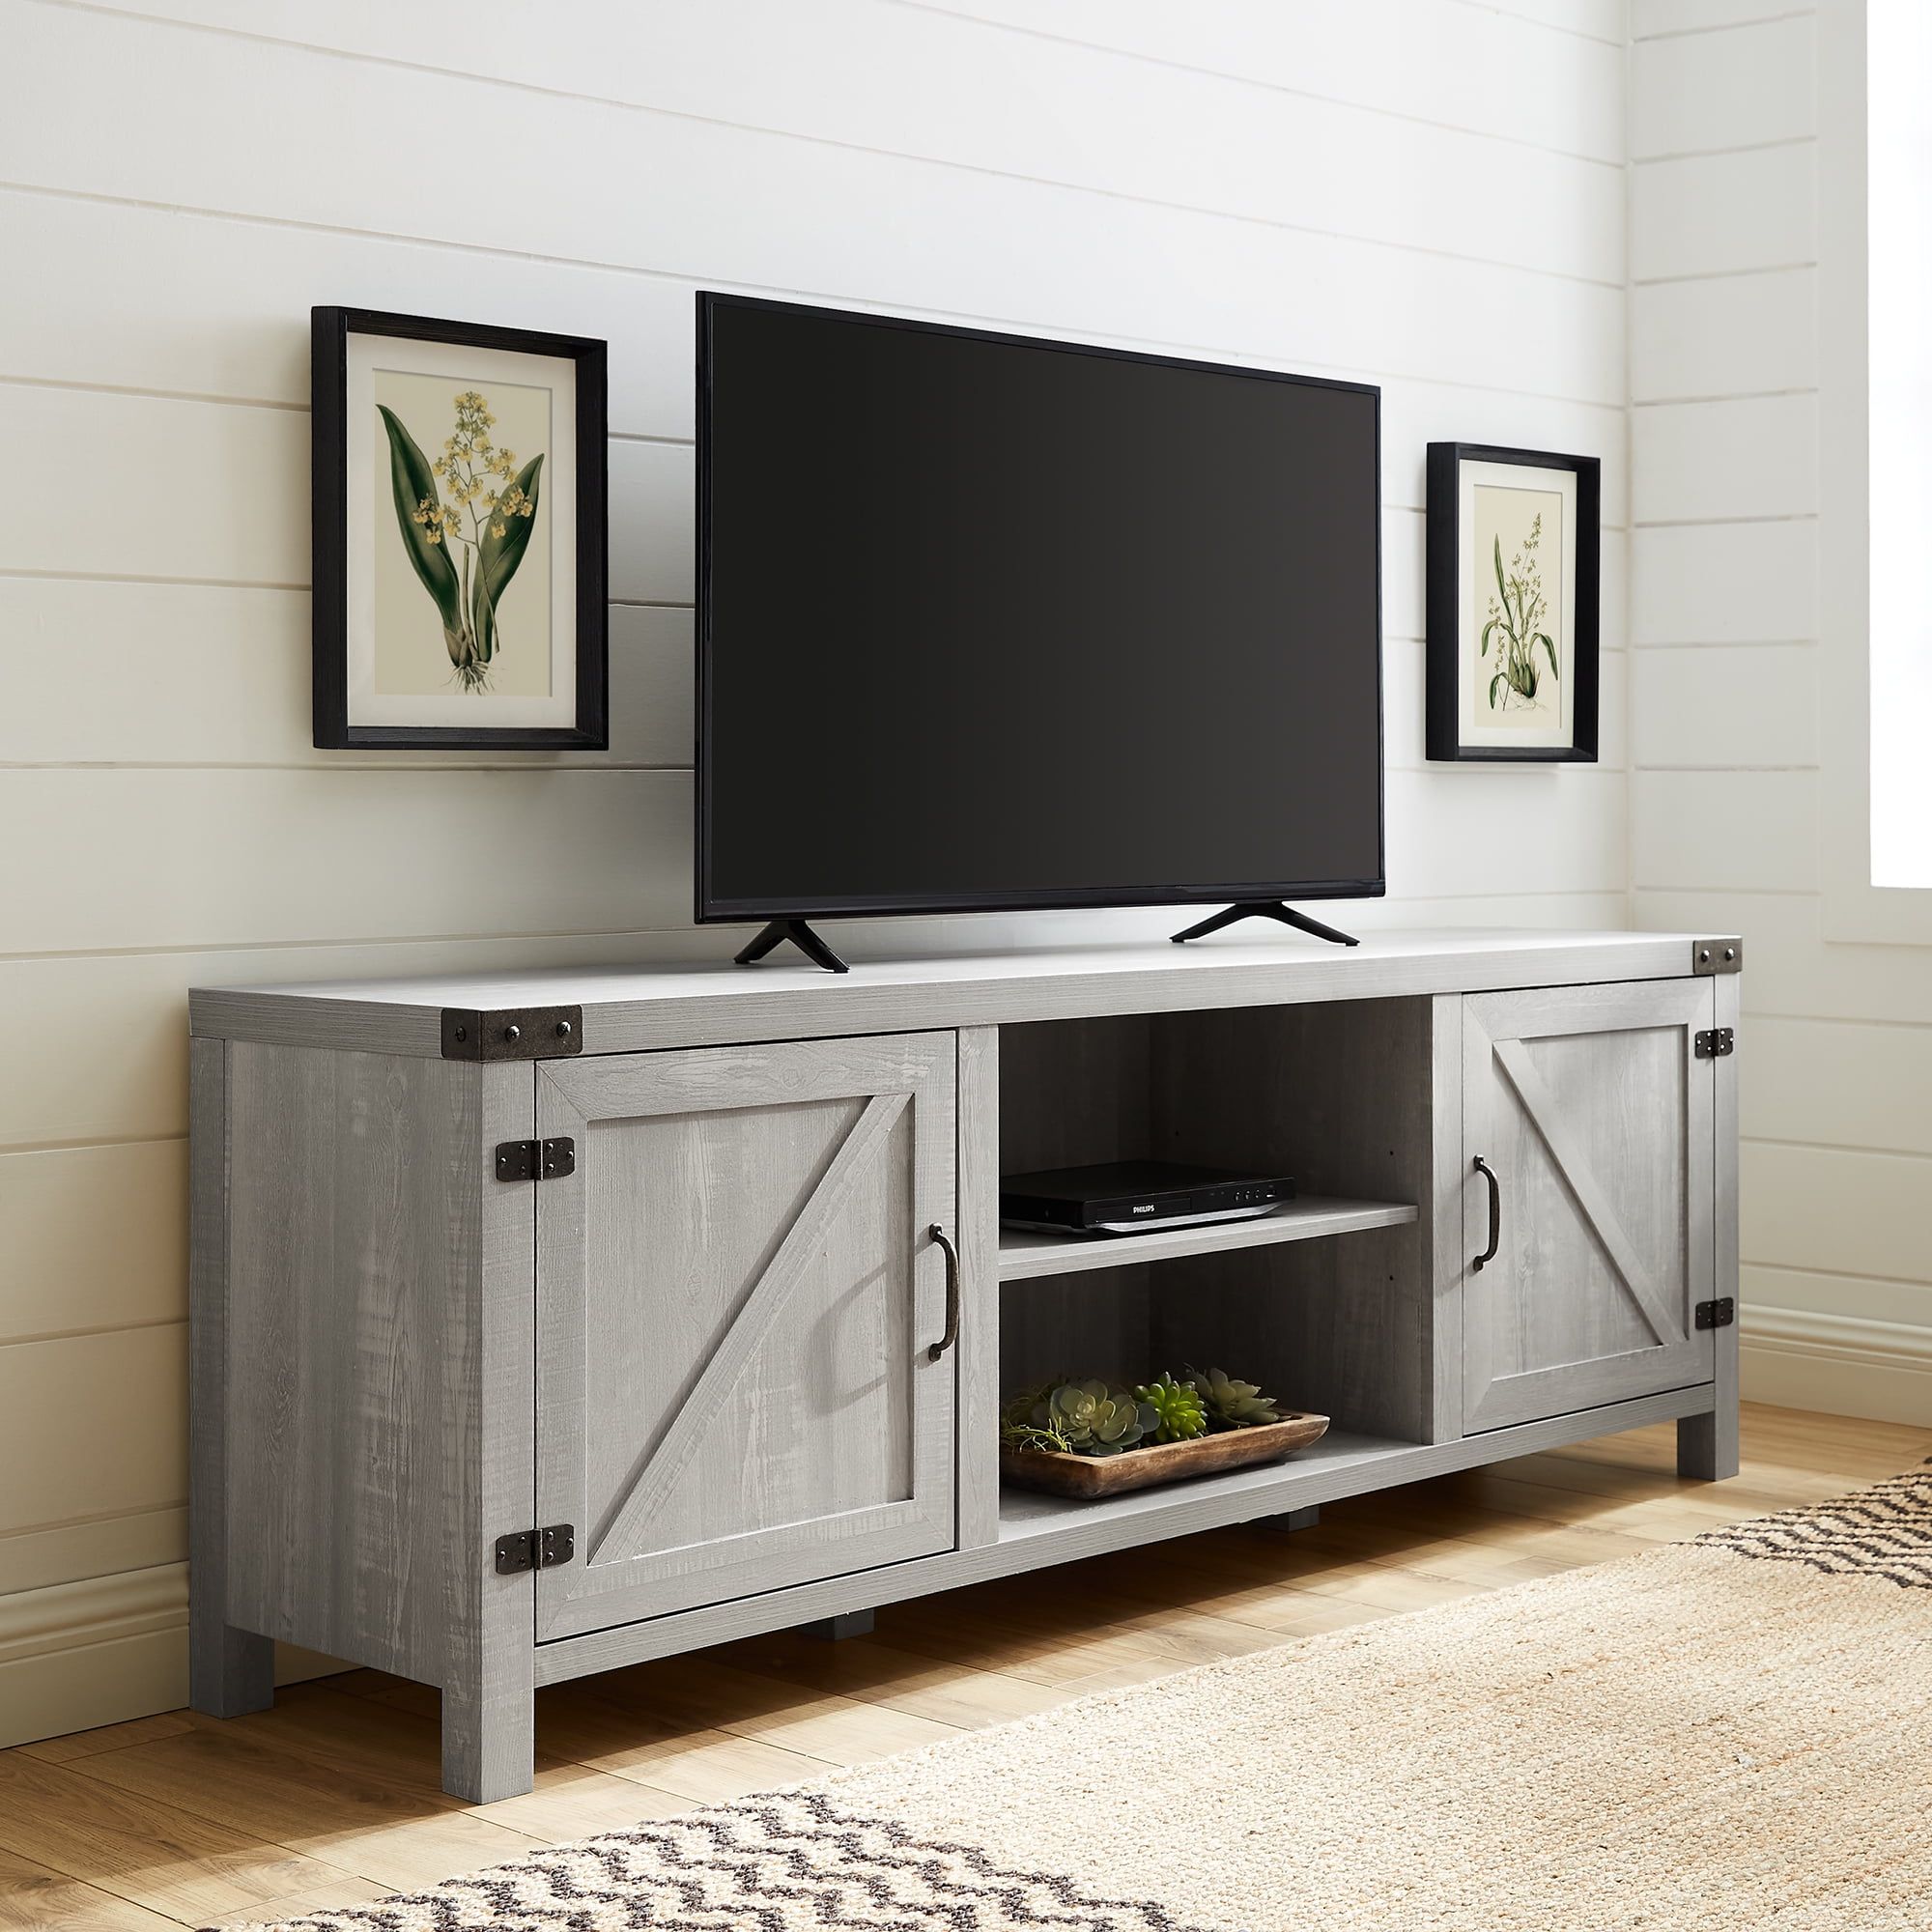 Woven Paths Farmhouse Barn Door Tv Stand For Tvs Up To 80", Stone Grey Intended For Farmhouse Tv Stands (View 13 of 20)